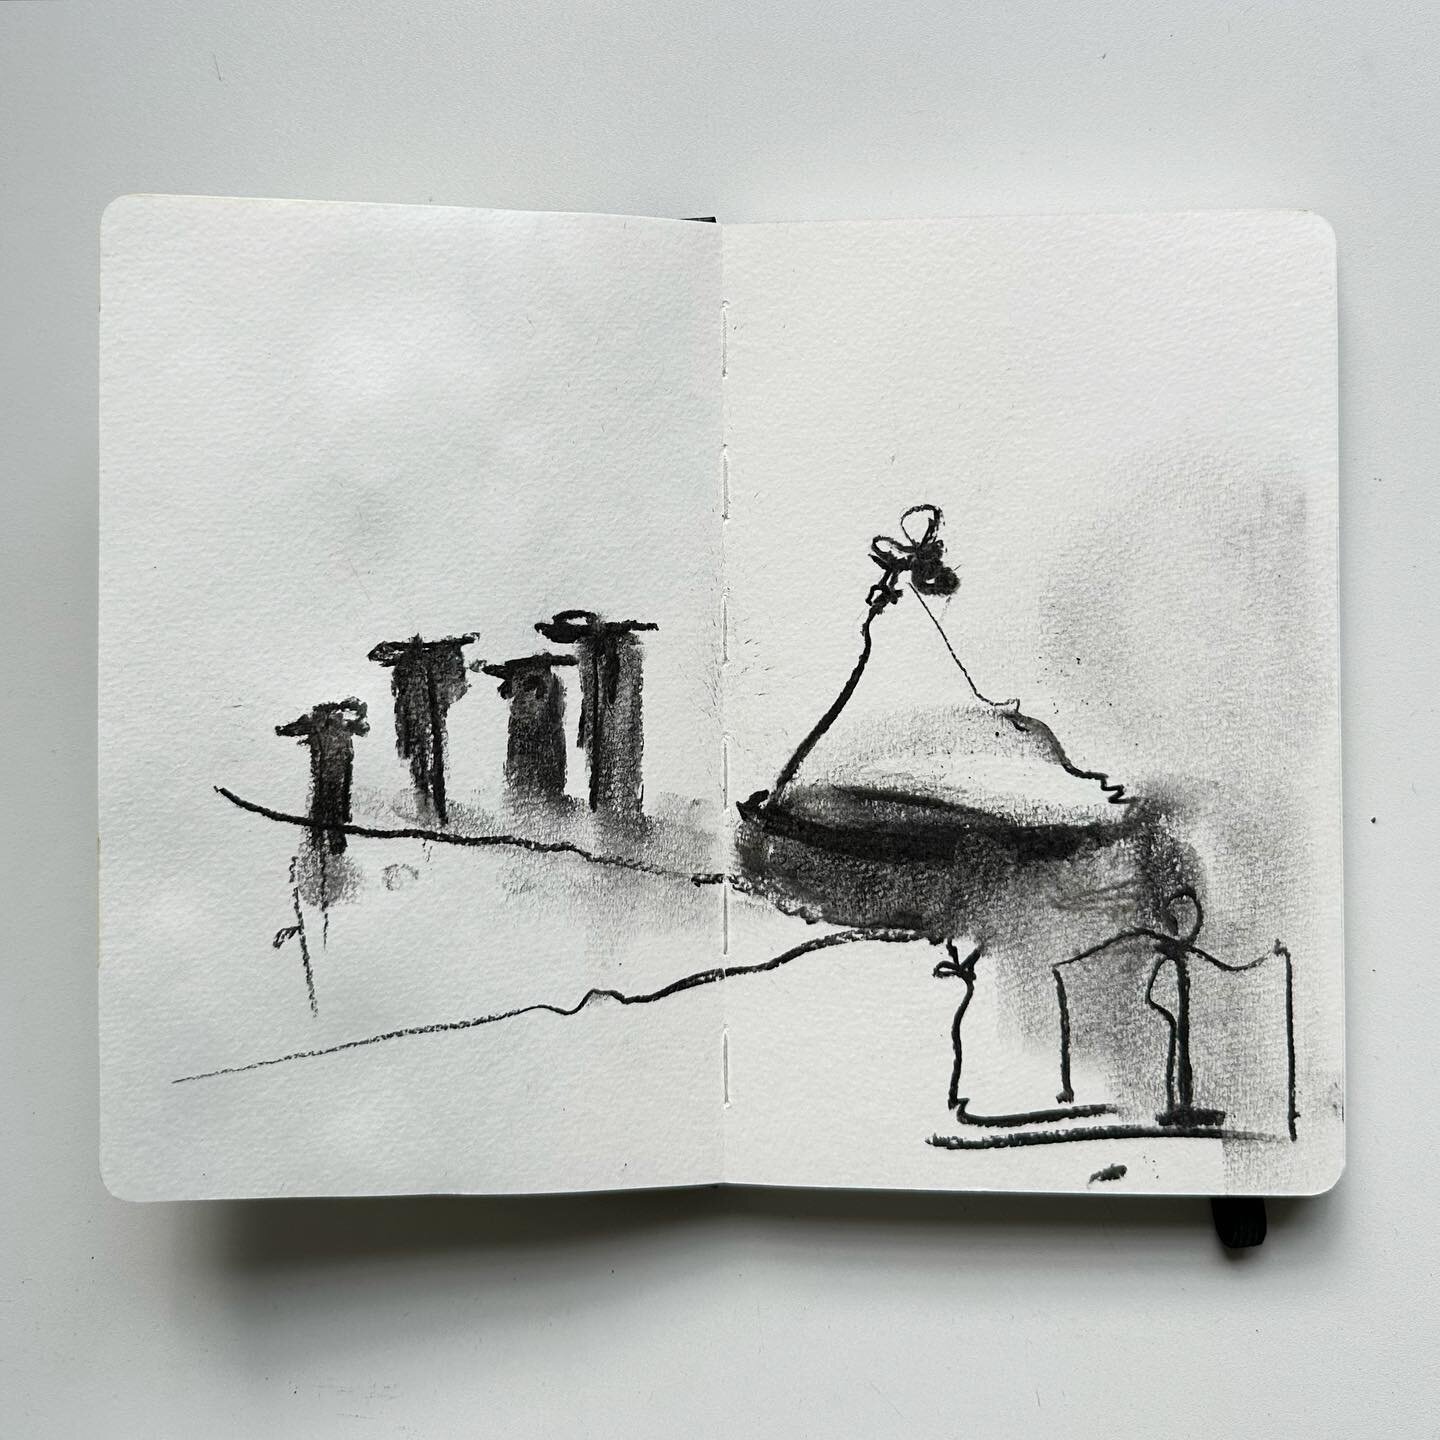 Rooftops ➿
.
.
.
#mika_ross_southall #art #sketchbook #rooftops #contemporaryart #abstractart #charcoaldrawing #charcoal #drawing #cityscape #city